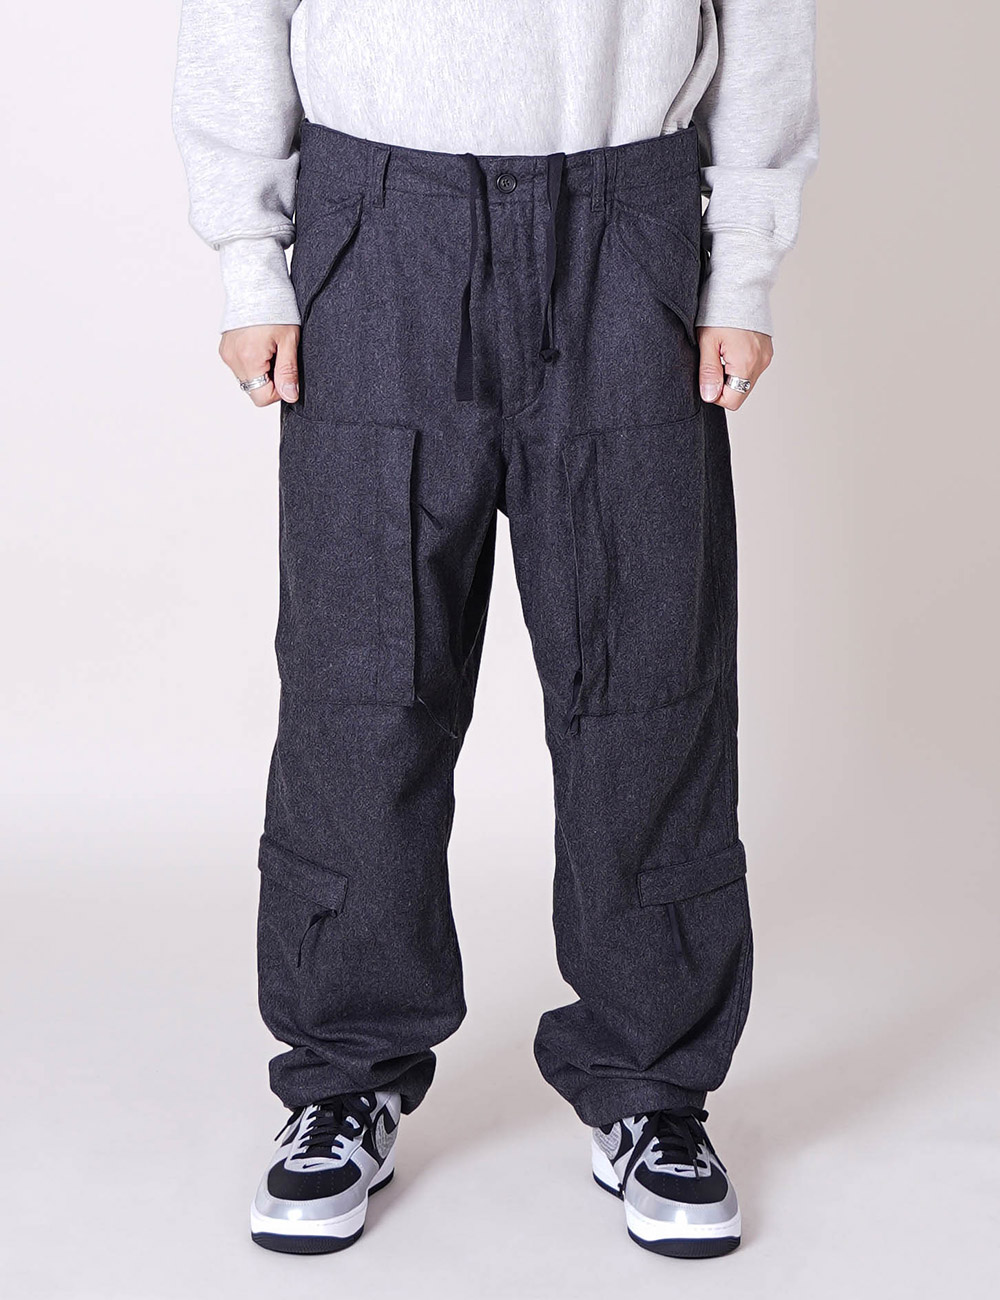 Aircrew Pant (Grey Wool Cotton Flannel)